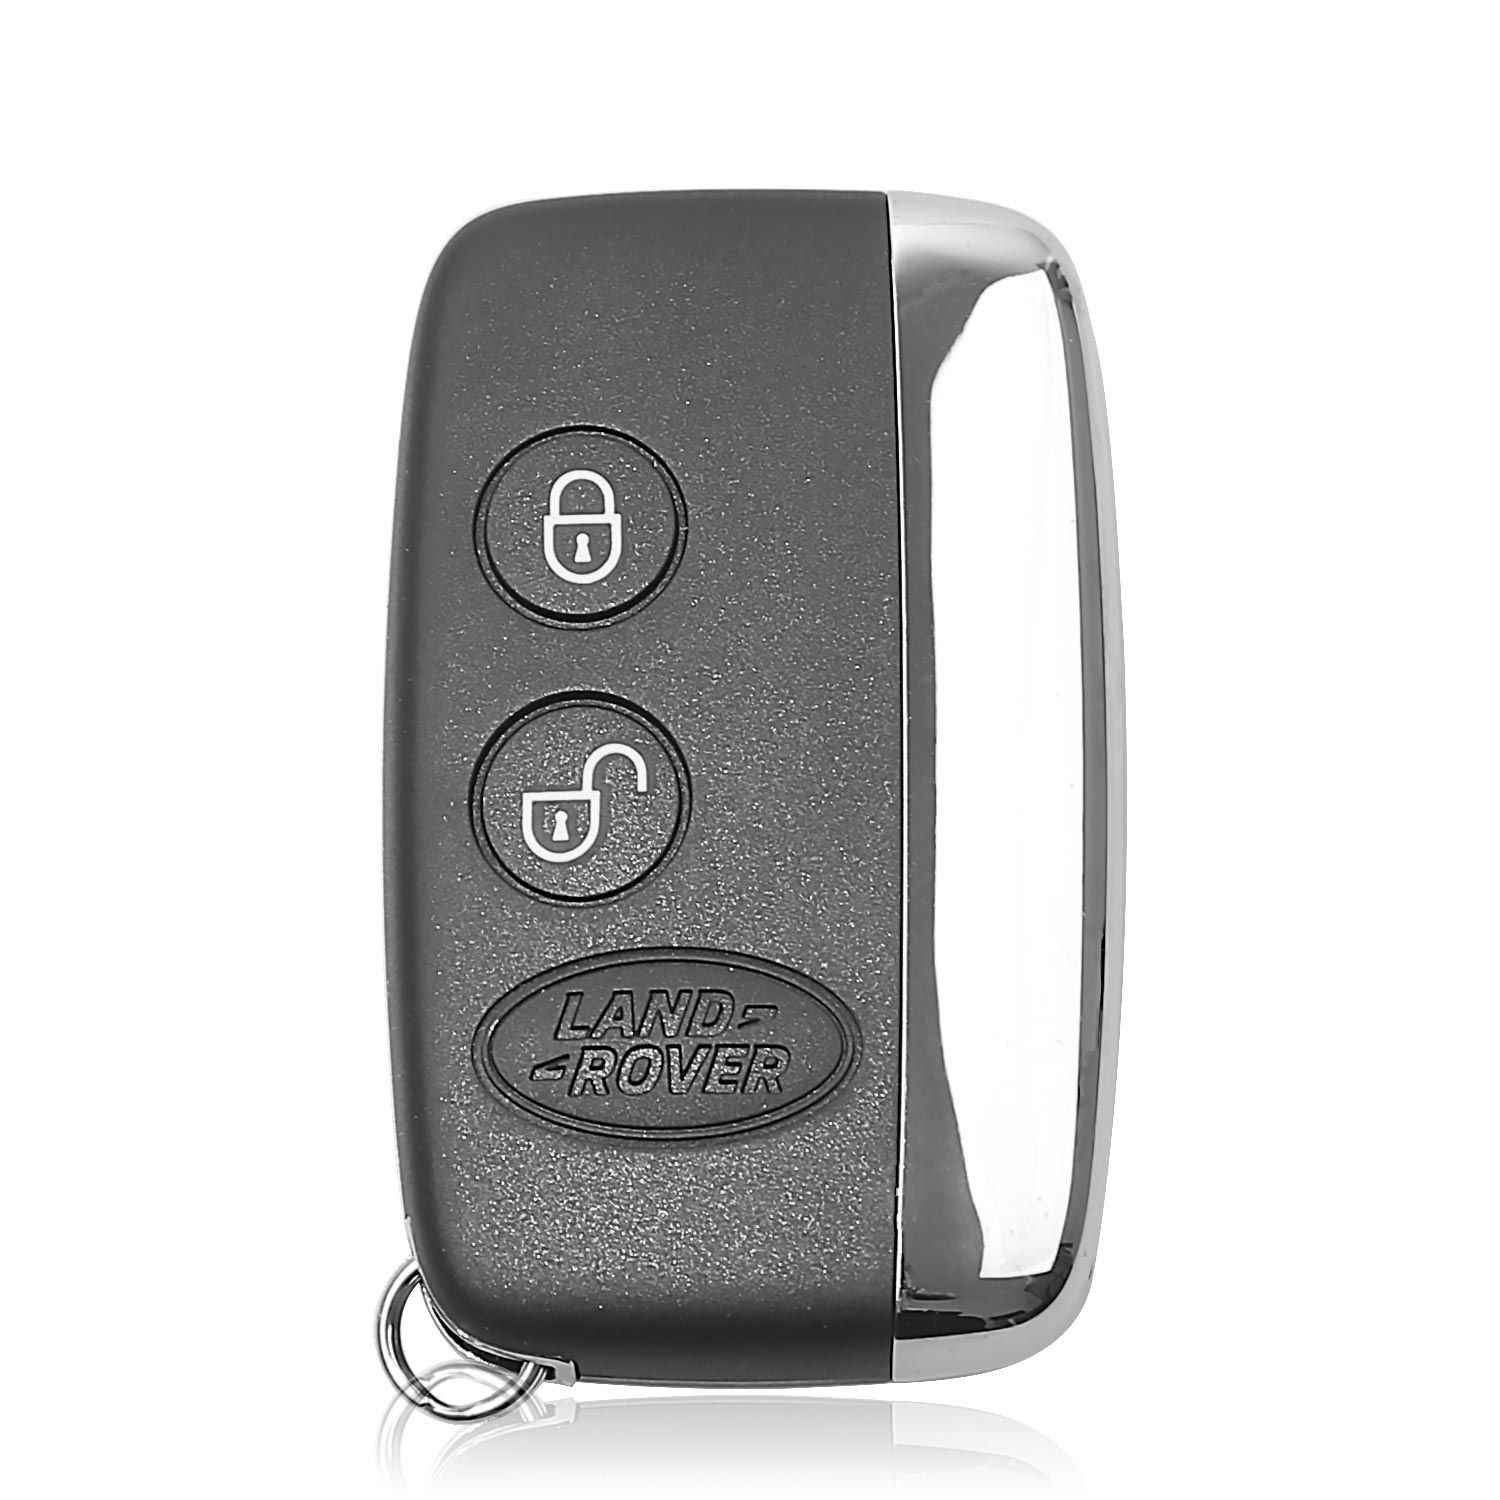 New 2 Button Smart Card For LandRover 433MHZ